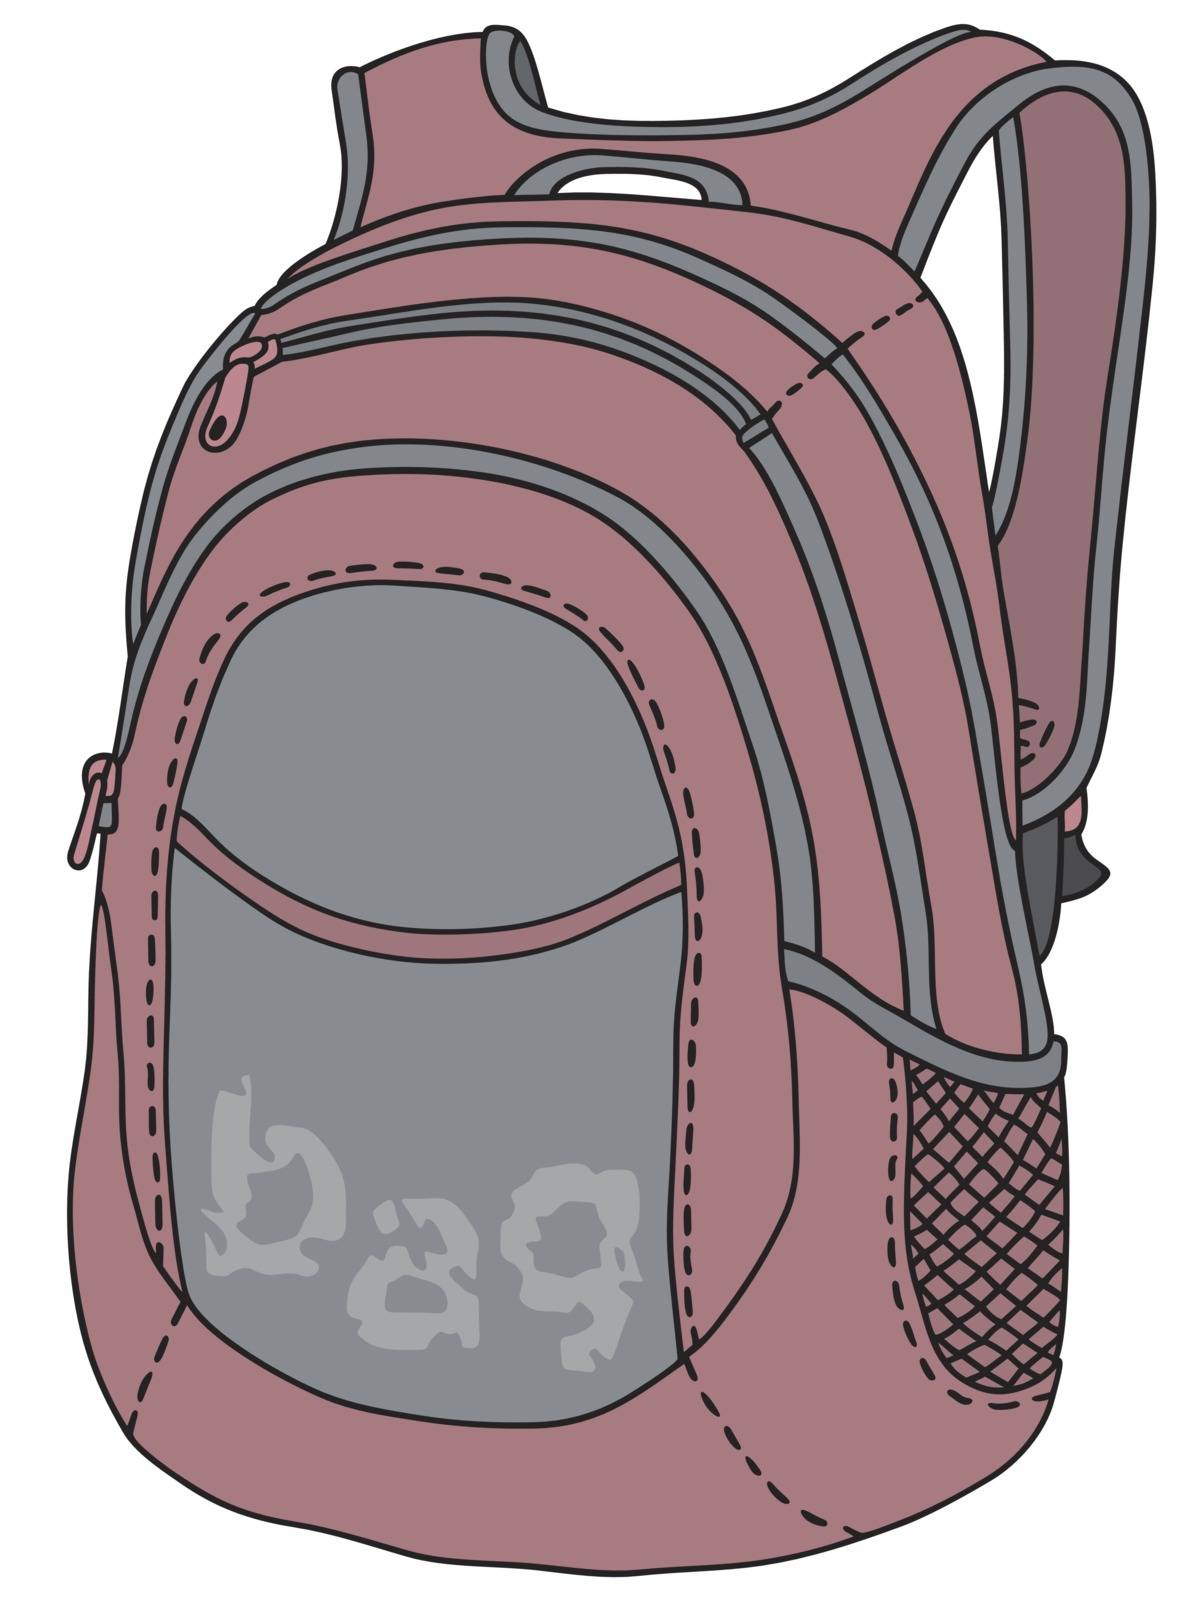 Hand drawing of a violet sports bag